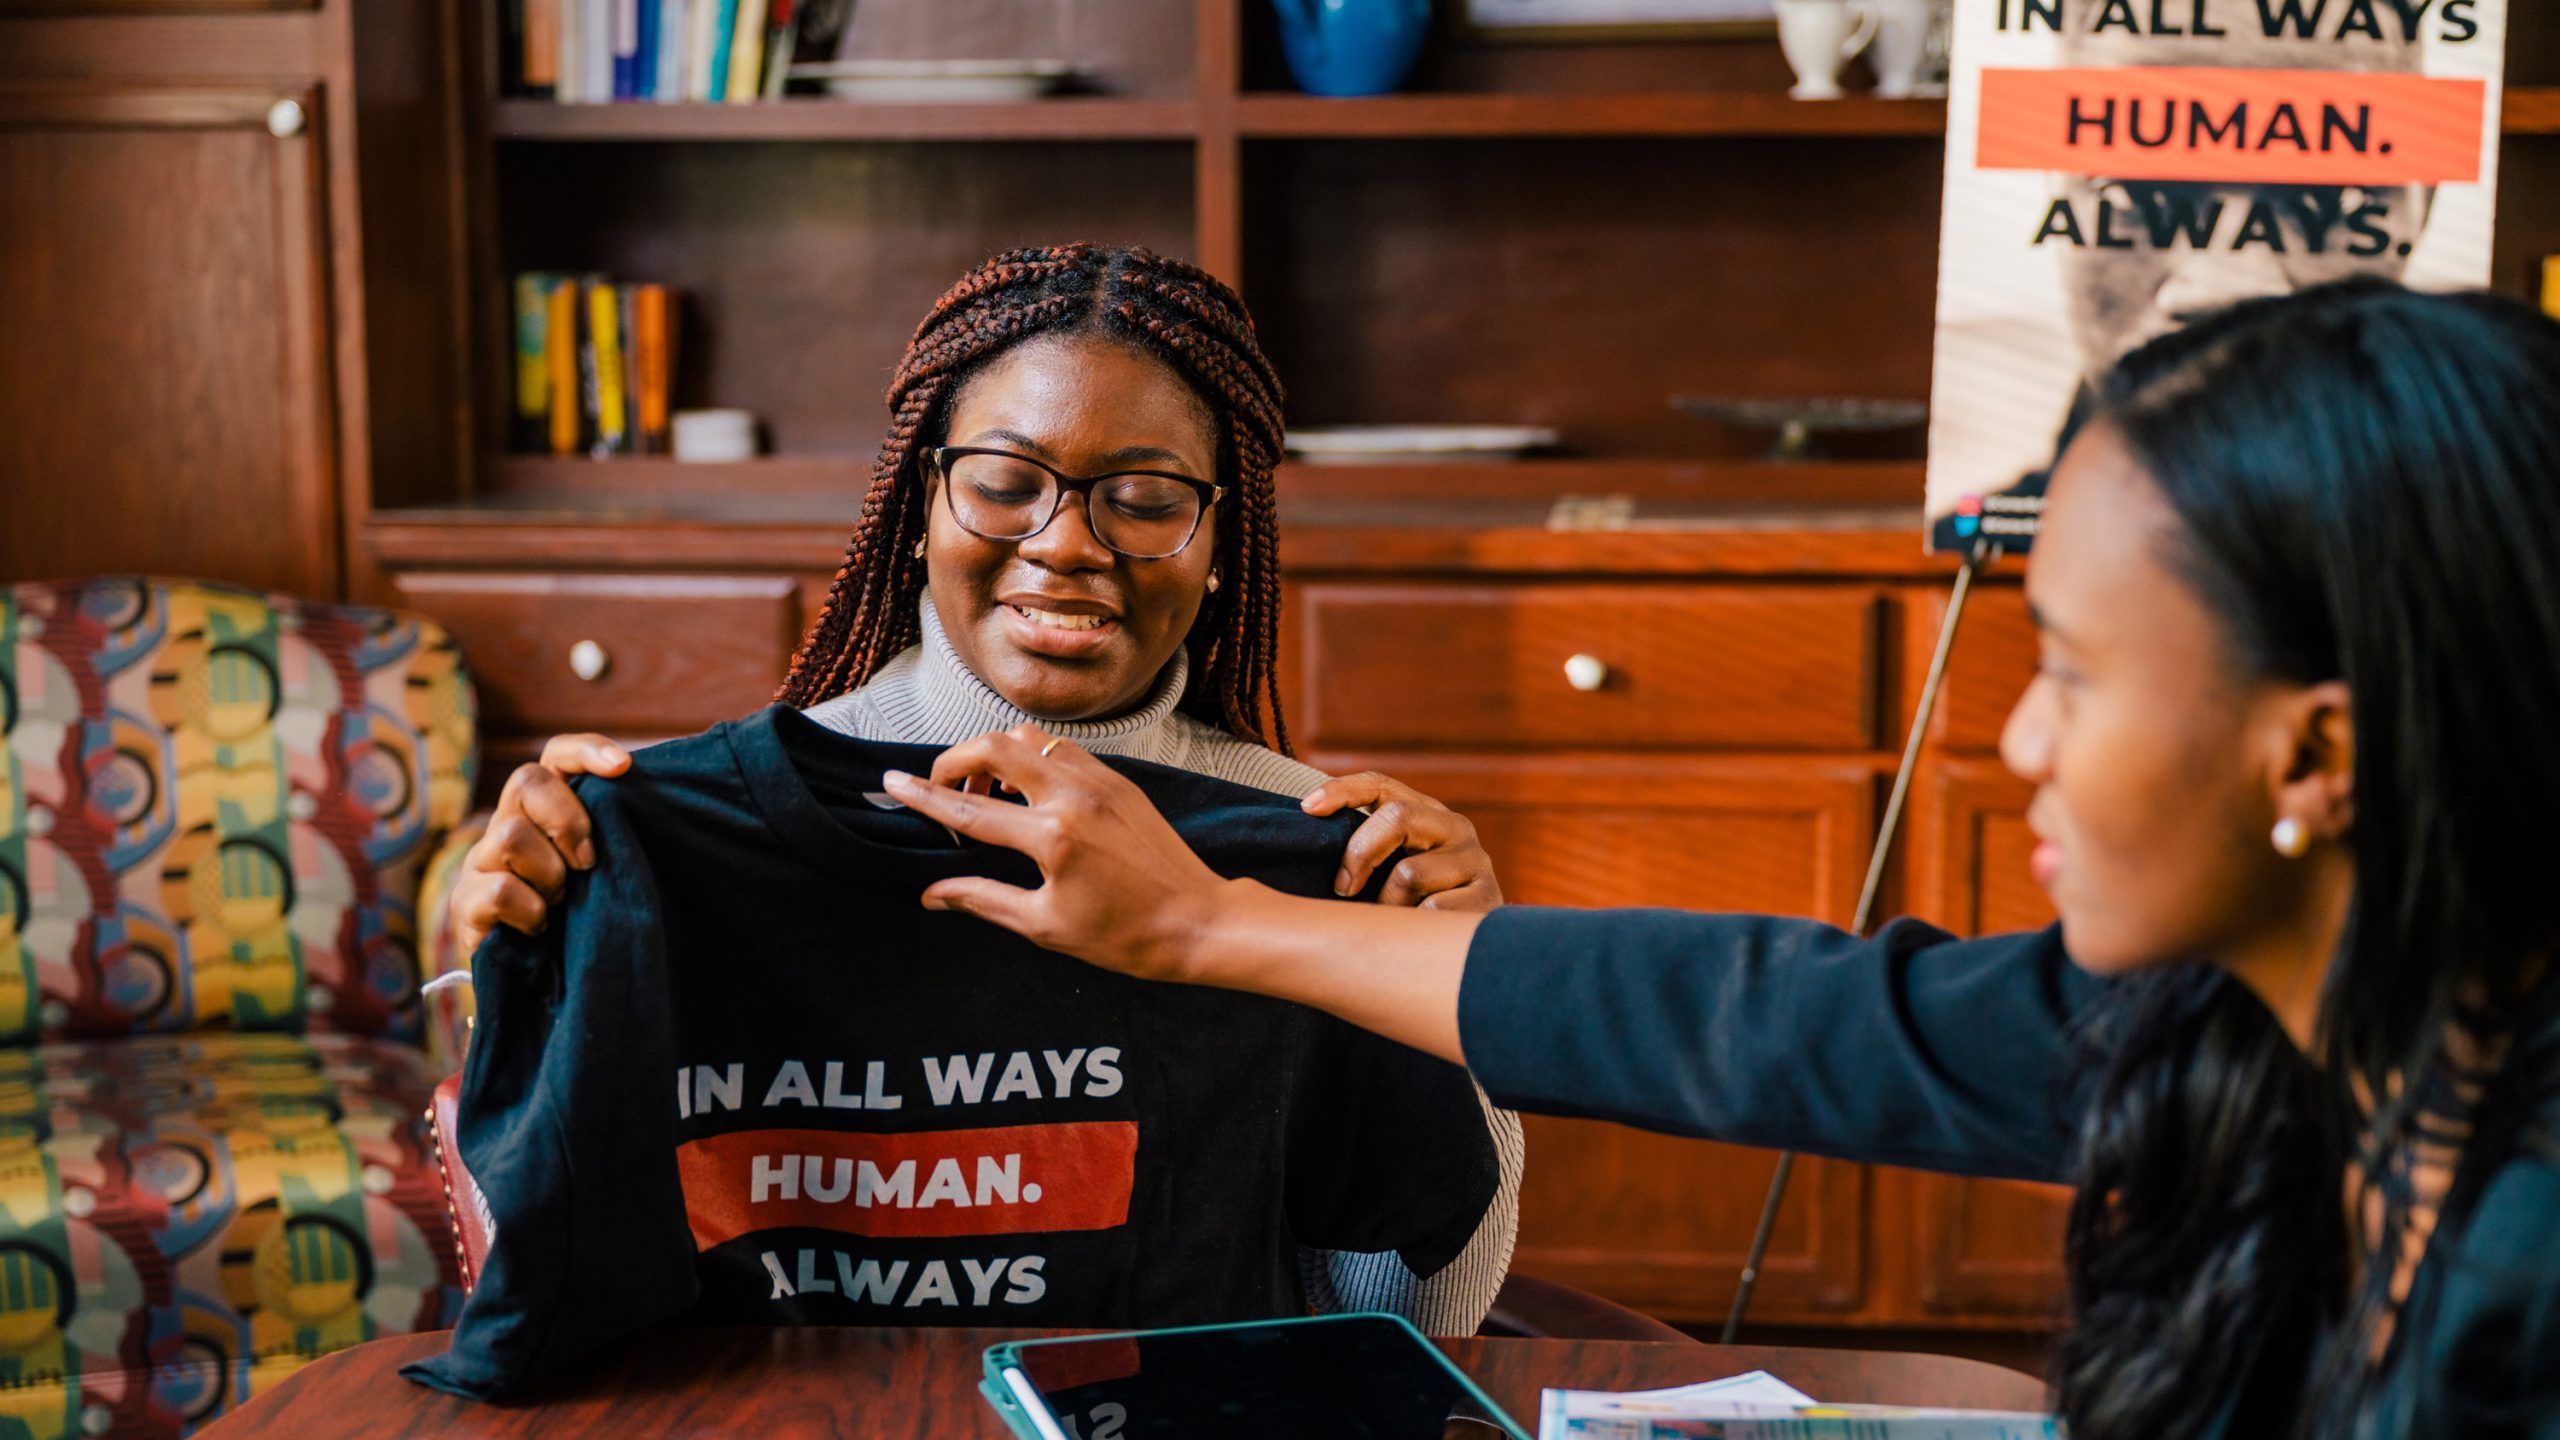 Doctoral student Youselene Beauplan holds a shirt that says "In All Ways Human. Always"